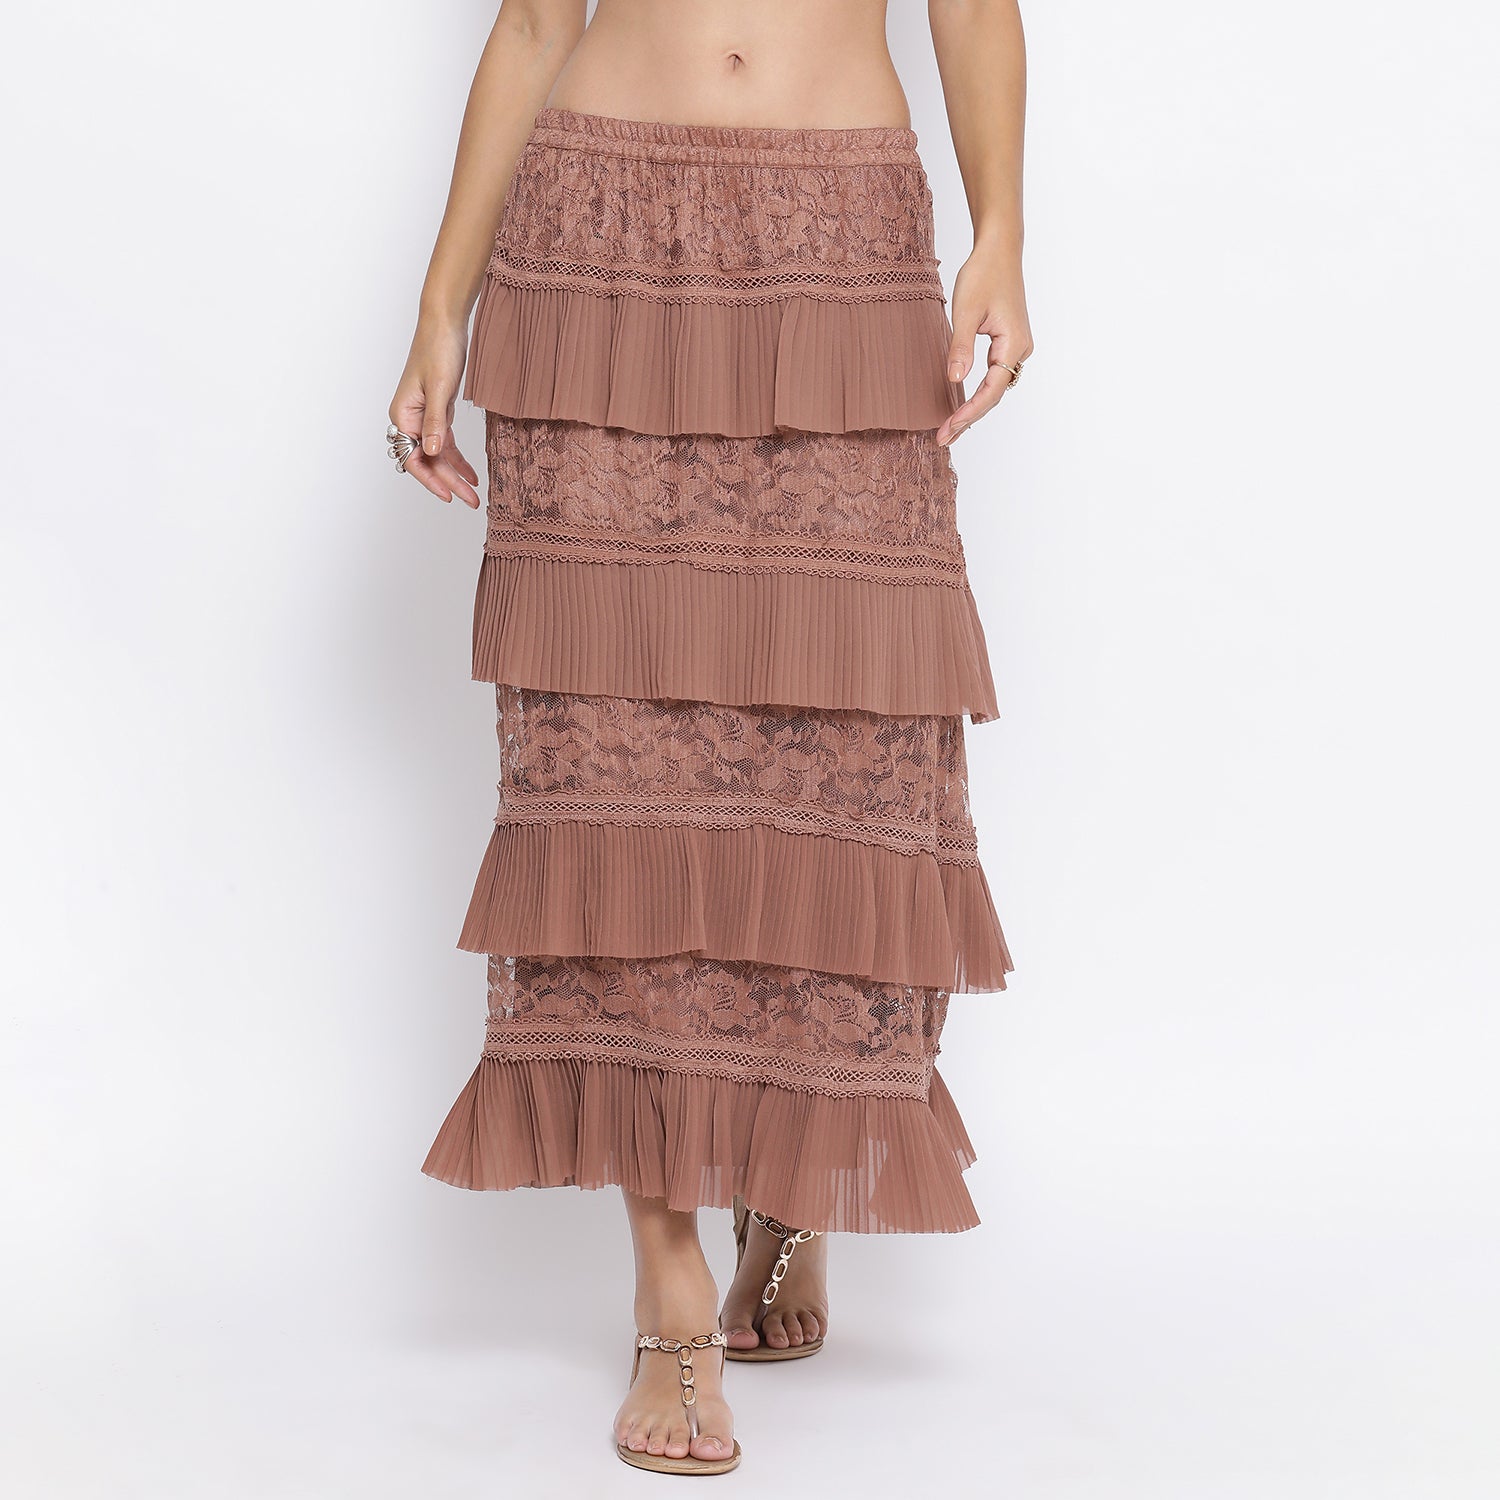 Rust Flower Net Frill Skirt With Lace